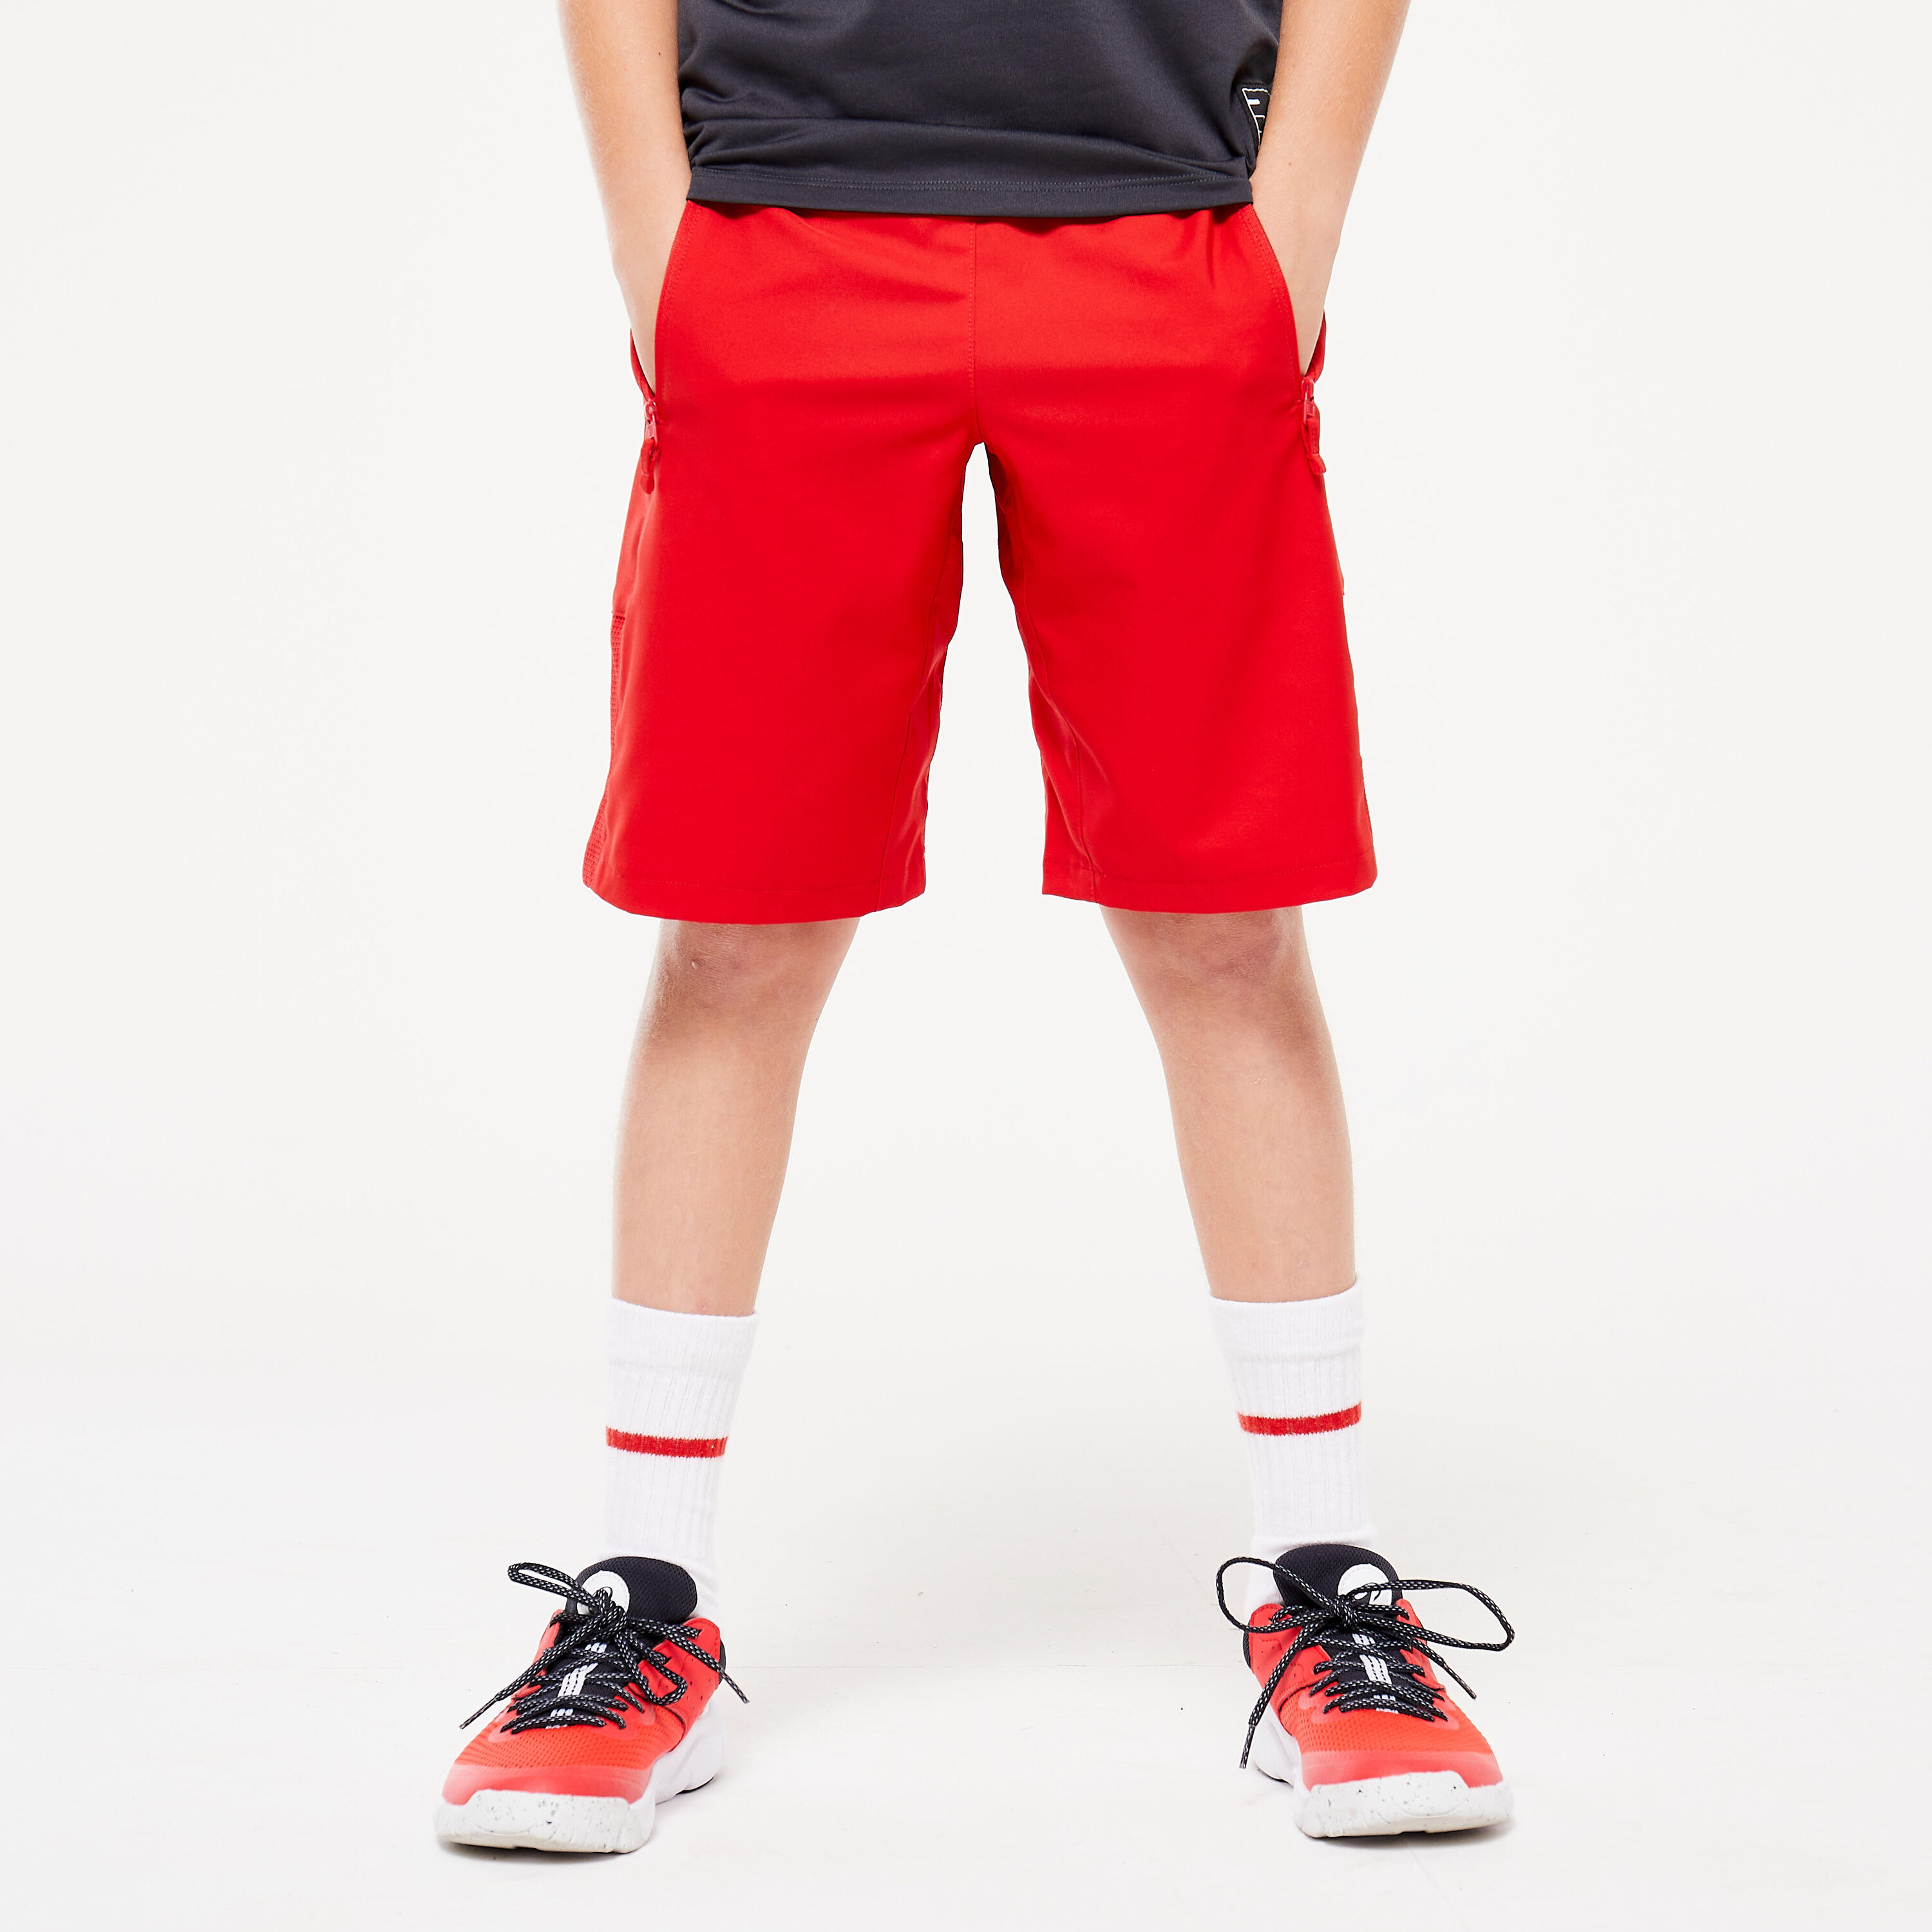 DECATHLON Kids' Breathable Shorts - Red